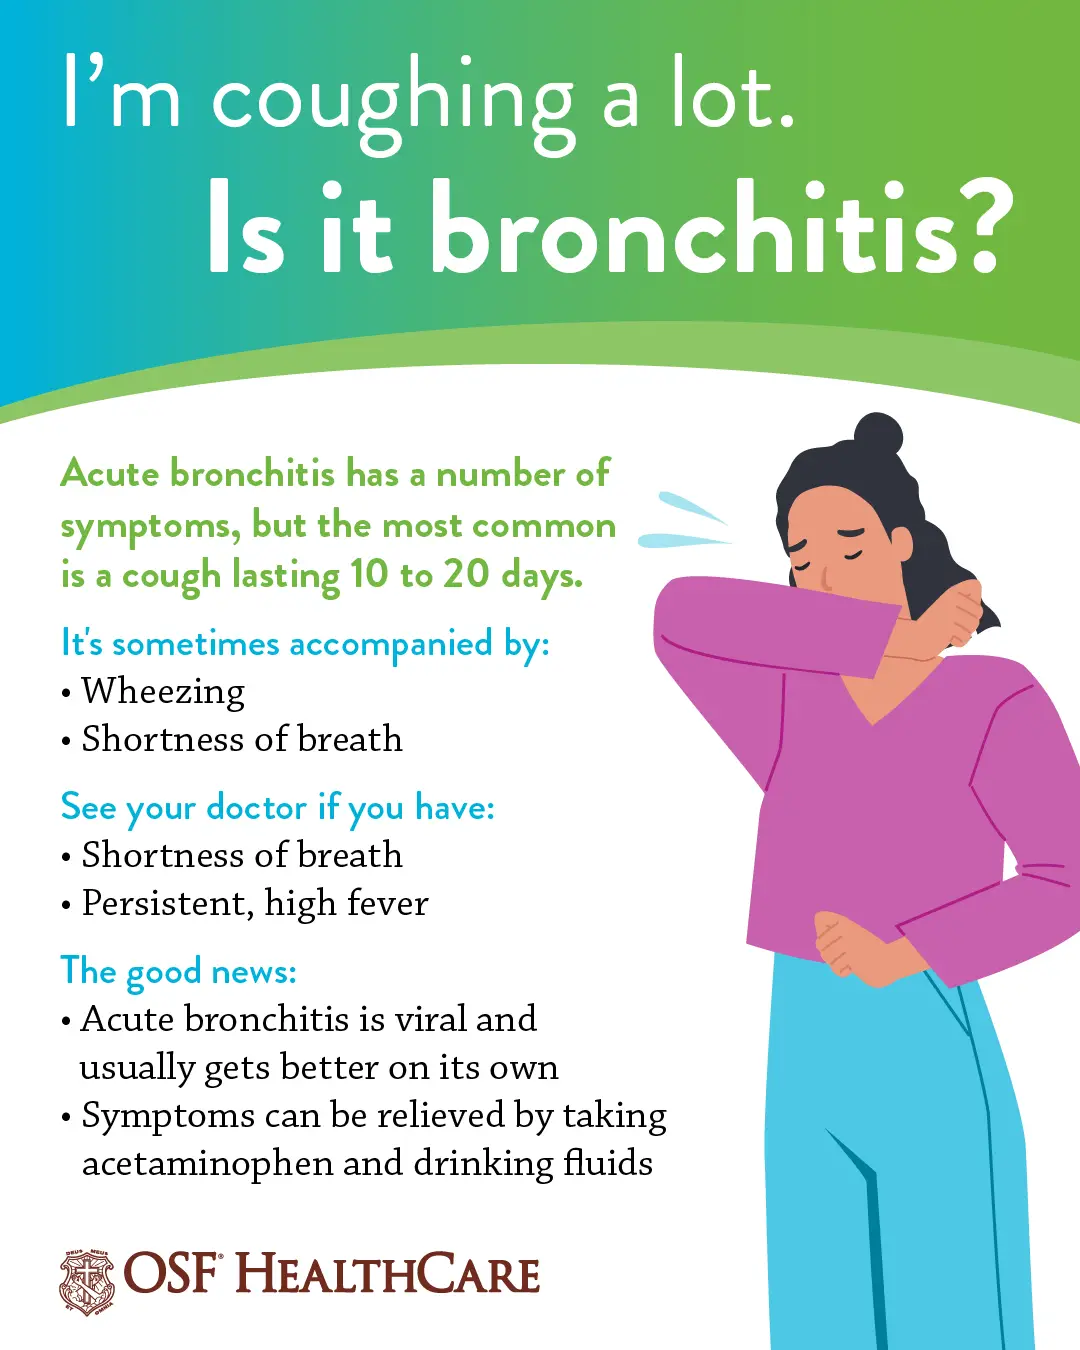 Im coughing a lot. Is it bronchitis?